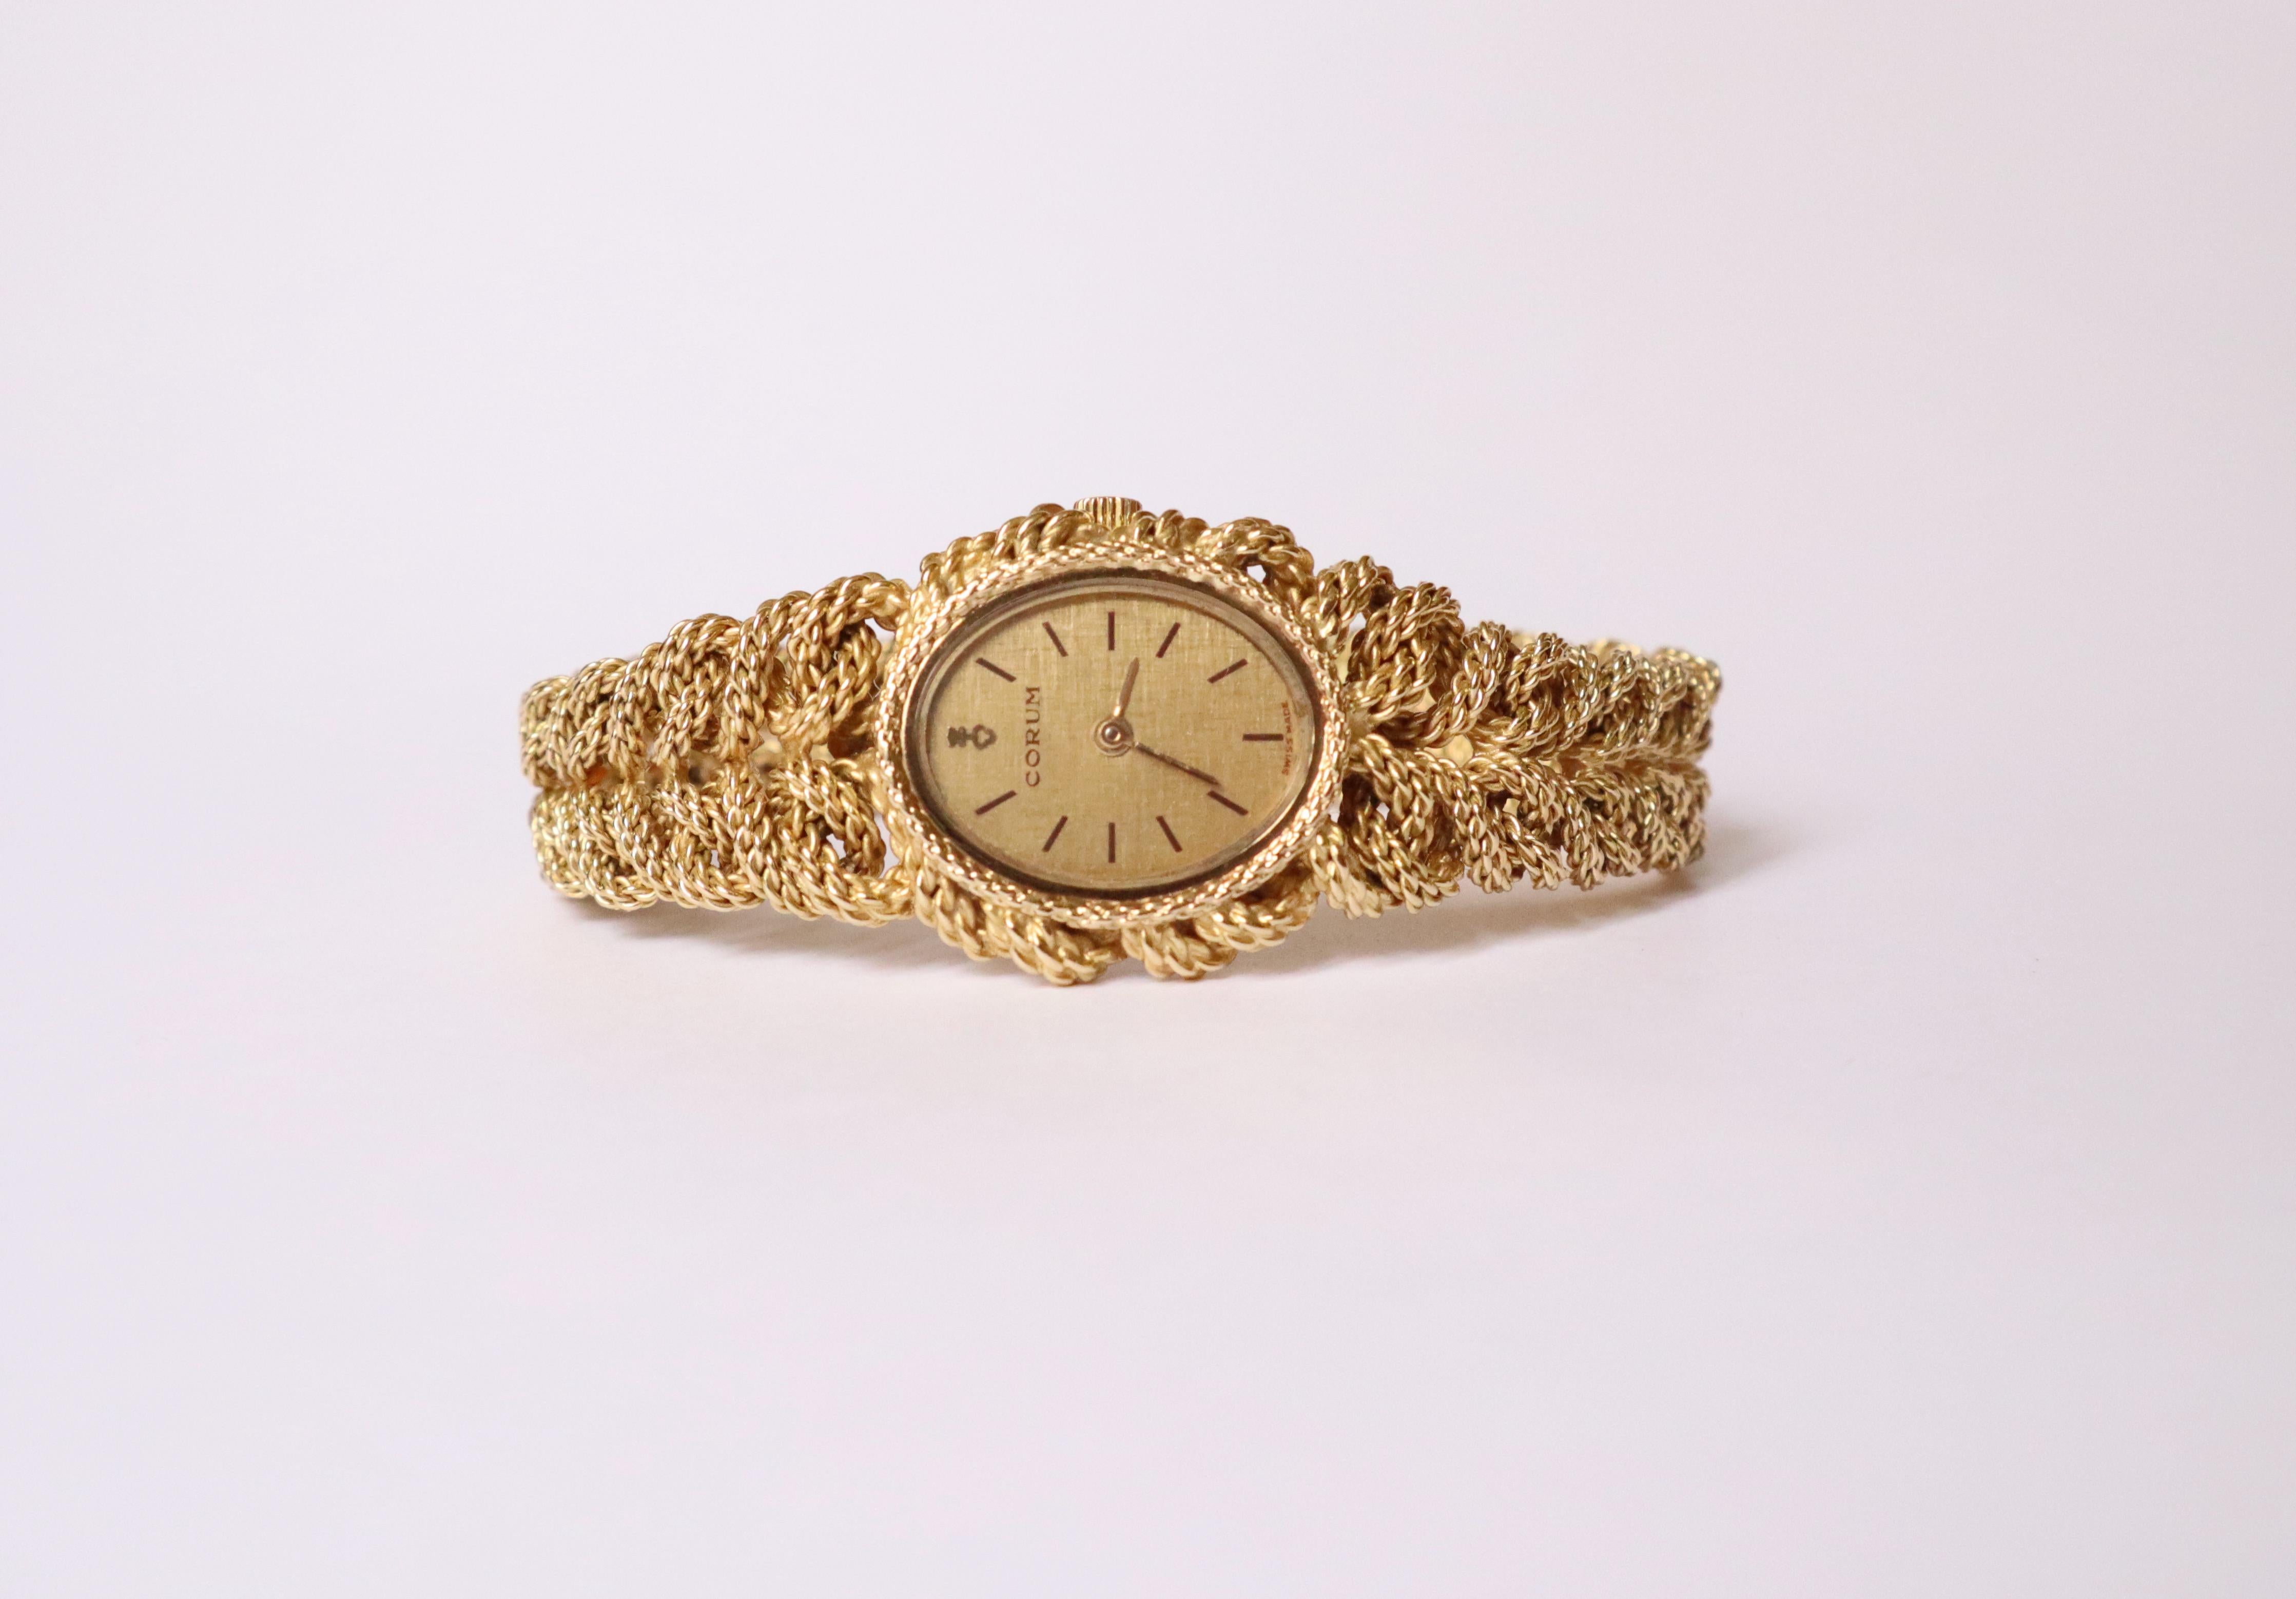 CORUM Oval lady's watch in 18 carat yellow gold. Stylized bezel. Oval case, snap closure bottom. Champagne dial with baton indexes. mechanical movement with manual winding. Bracelet in 18 carat yellow gold with clasp. 
Size: 21×20mm. 
Wrist: 16.4 to